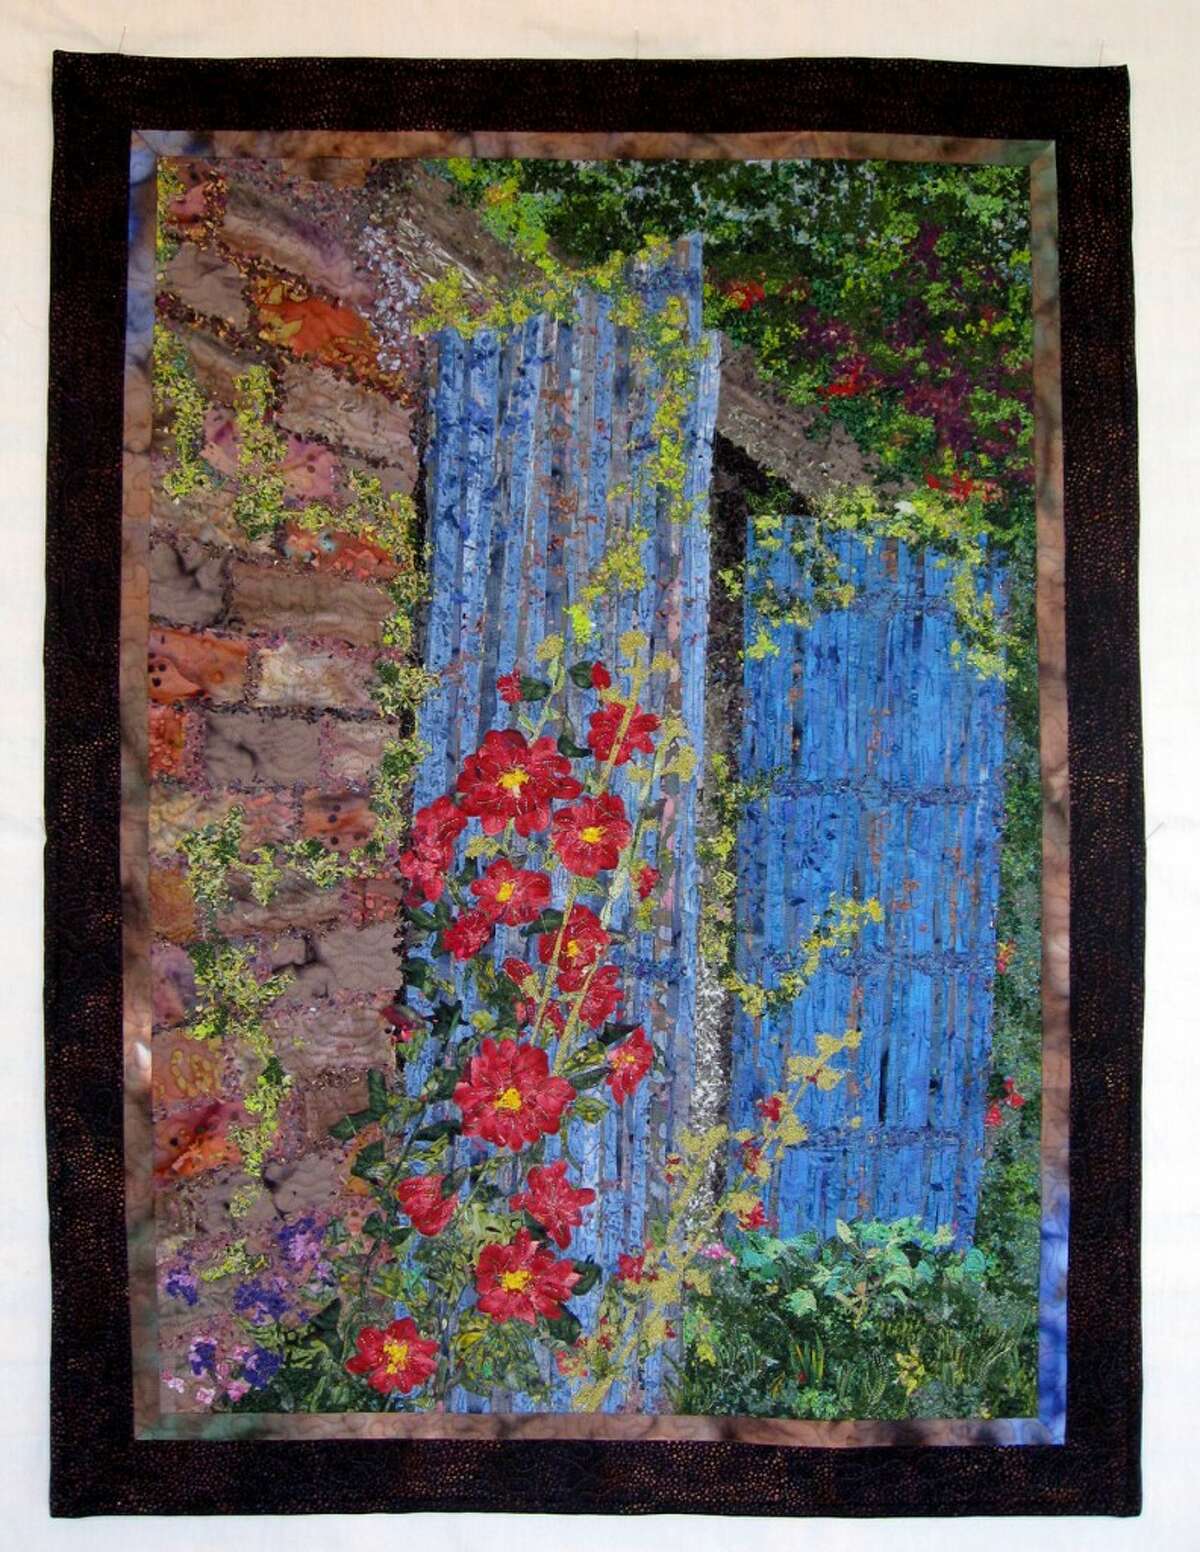 Sally Manke, of Arcadia, will display her quilt, "Hollyhock Cottage," in an international competition in Grand Rapids this week. (Courtesy photo)